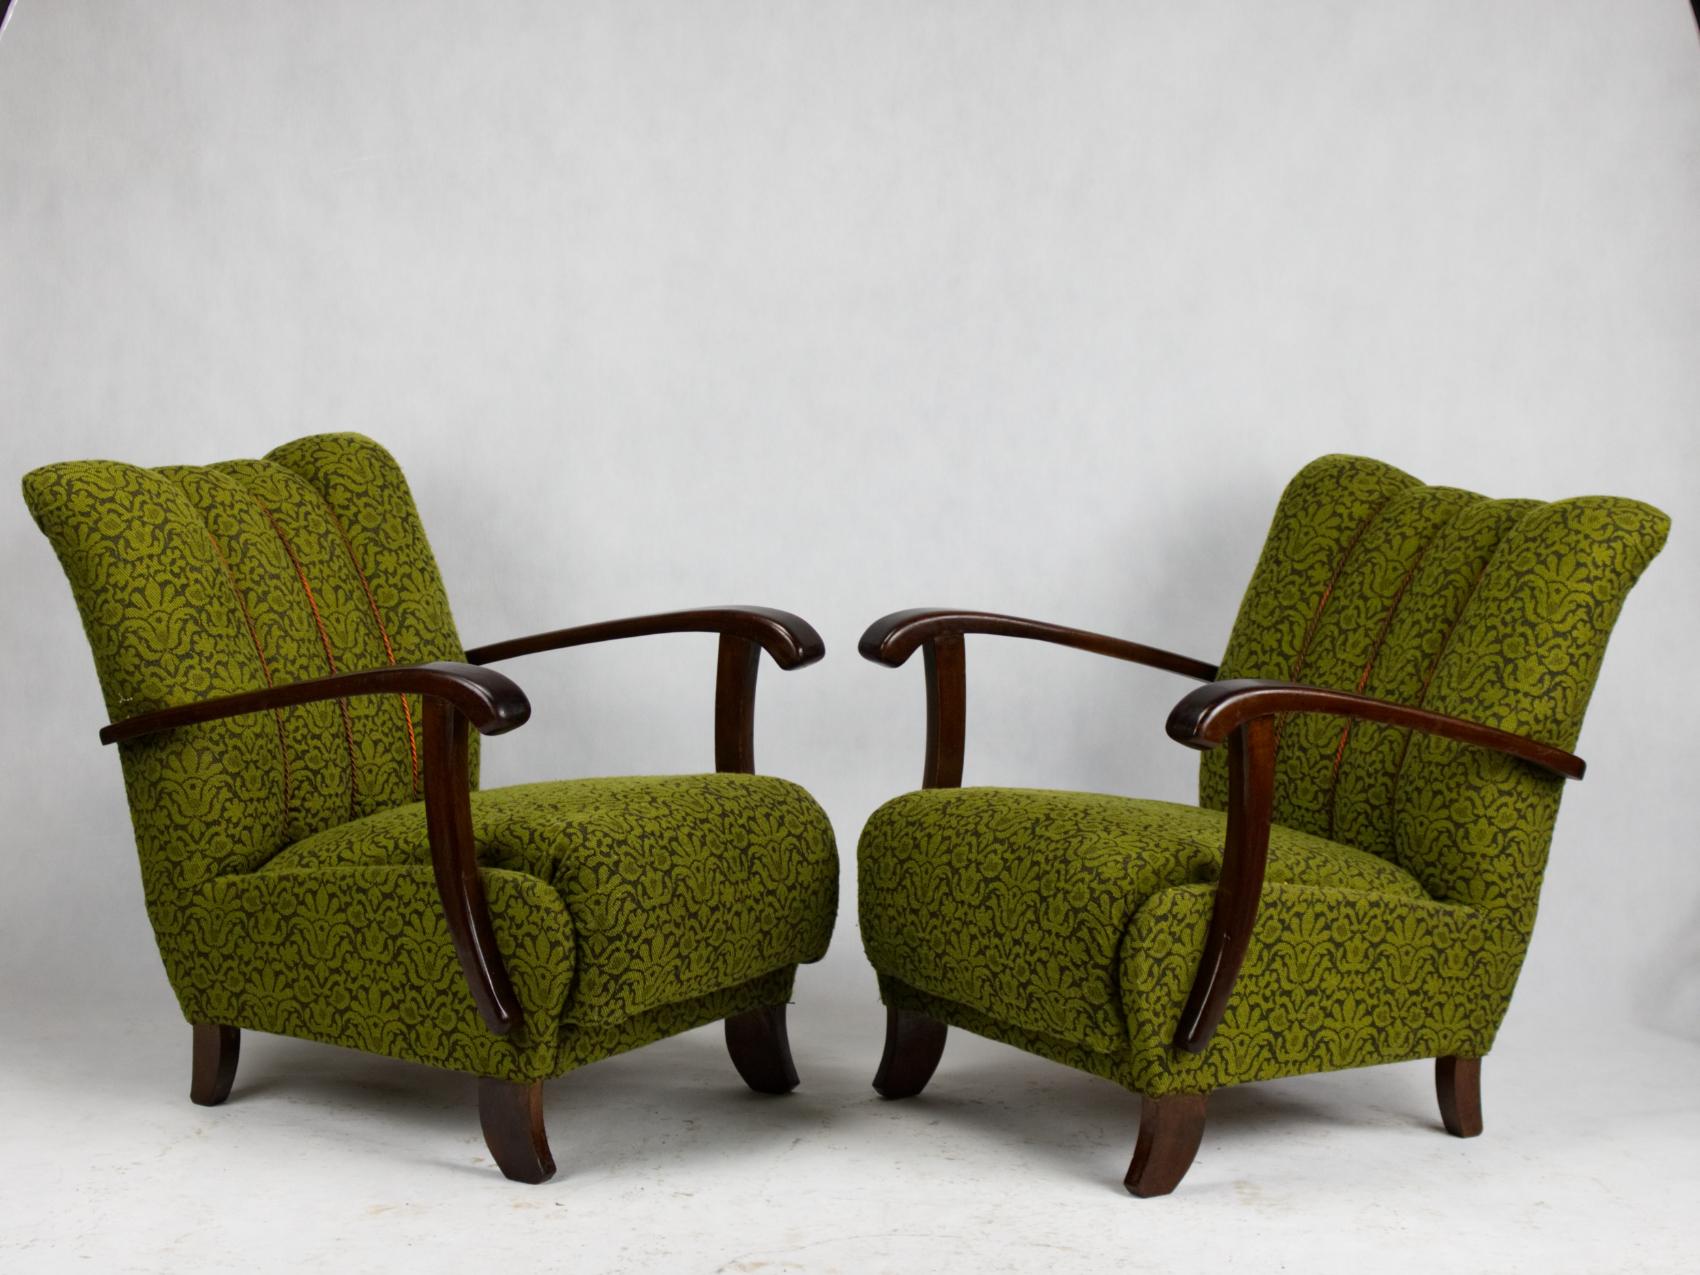 Art Deco B-970 Lounge Chairs by Thonet, 1920s